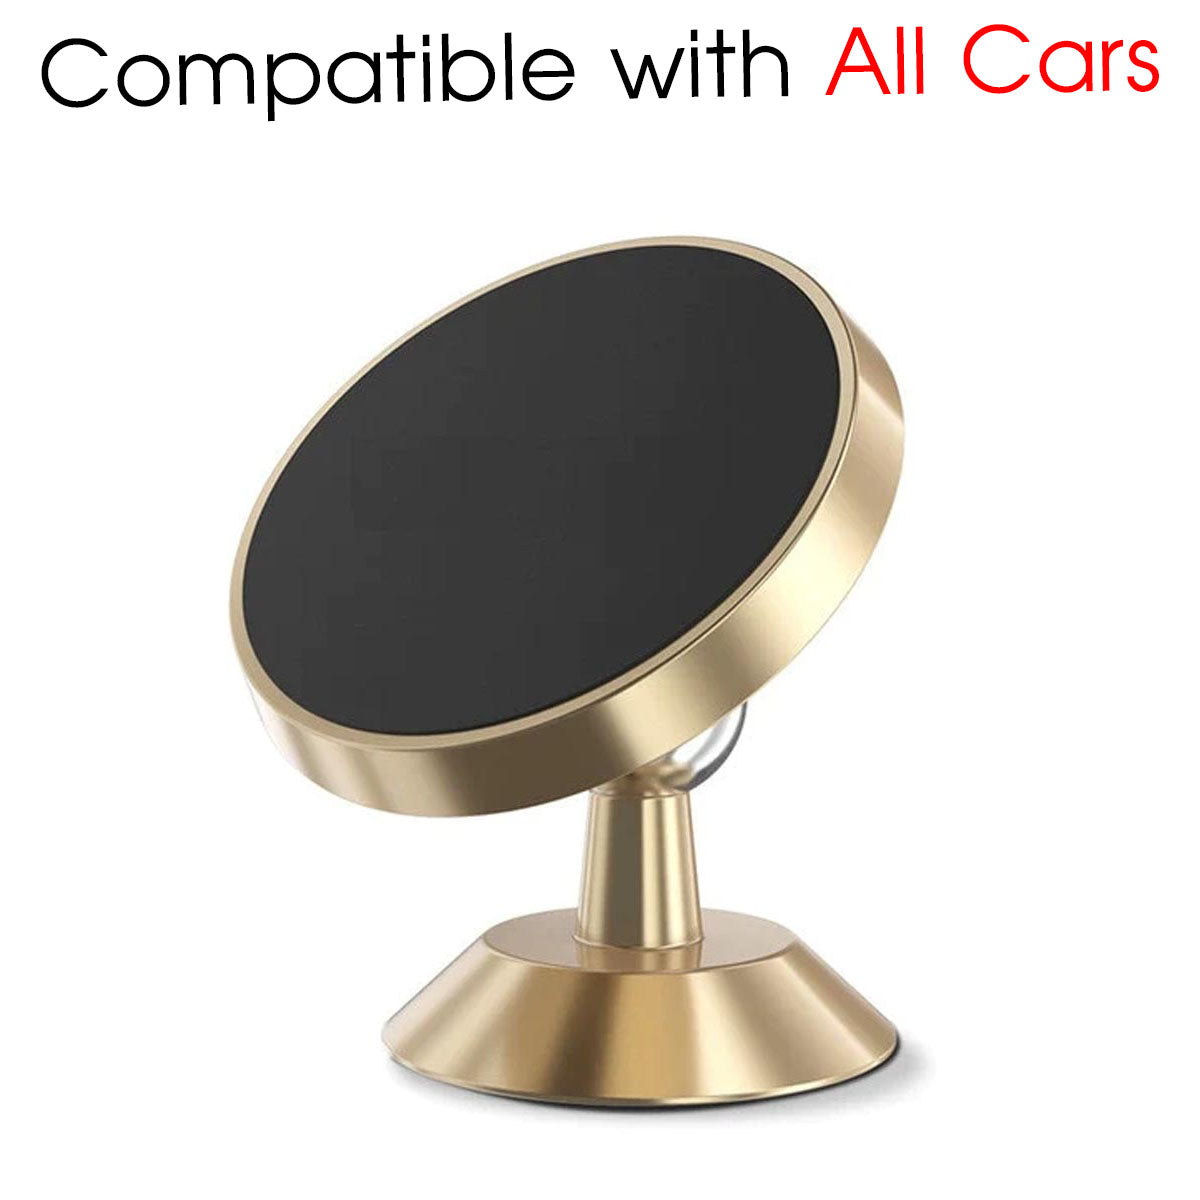 [2 Pack ] Magnetic Phone Mount, Custom For Your Cars, [ Super Strong Magnet ] [ with 4 Metal Plate ] car Magnetic Phone Holder, [ 360° Rotation ] Universal Dashboard car Mount Fits All Cell Phones, Car Accessories VE13982